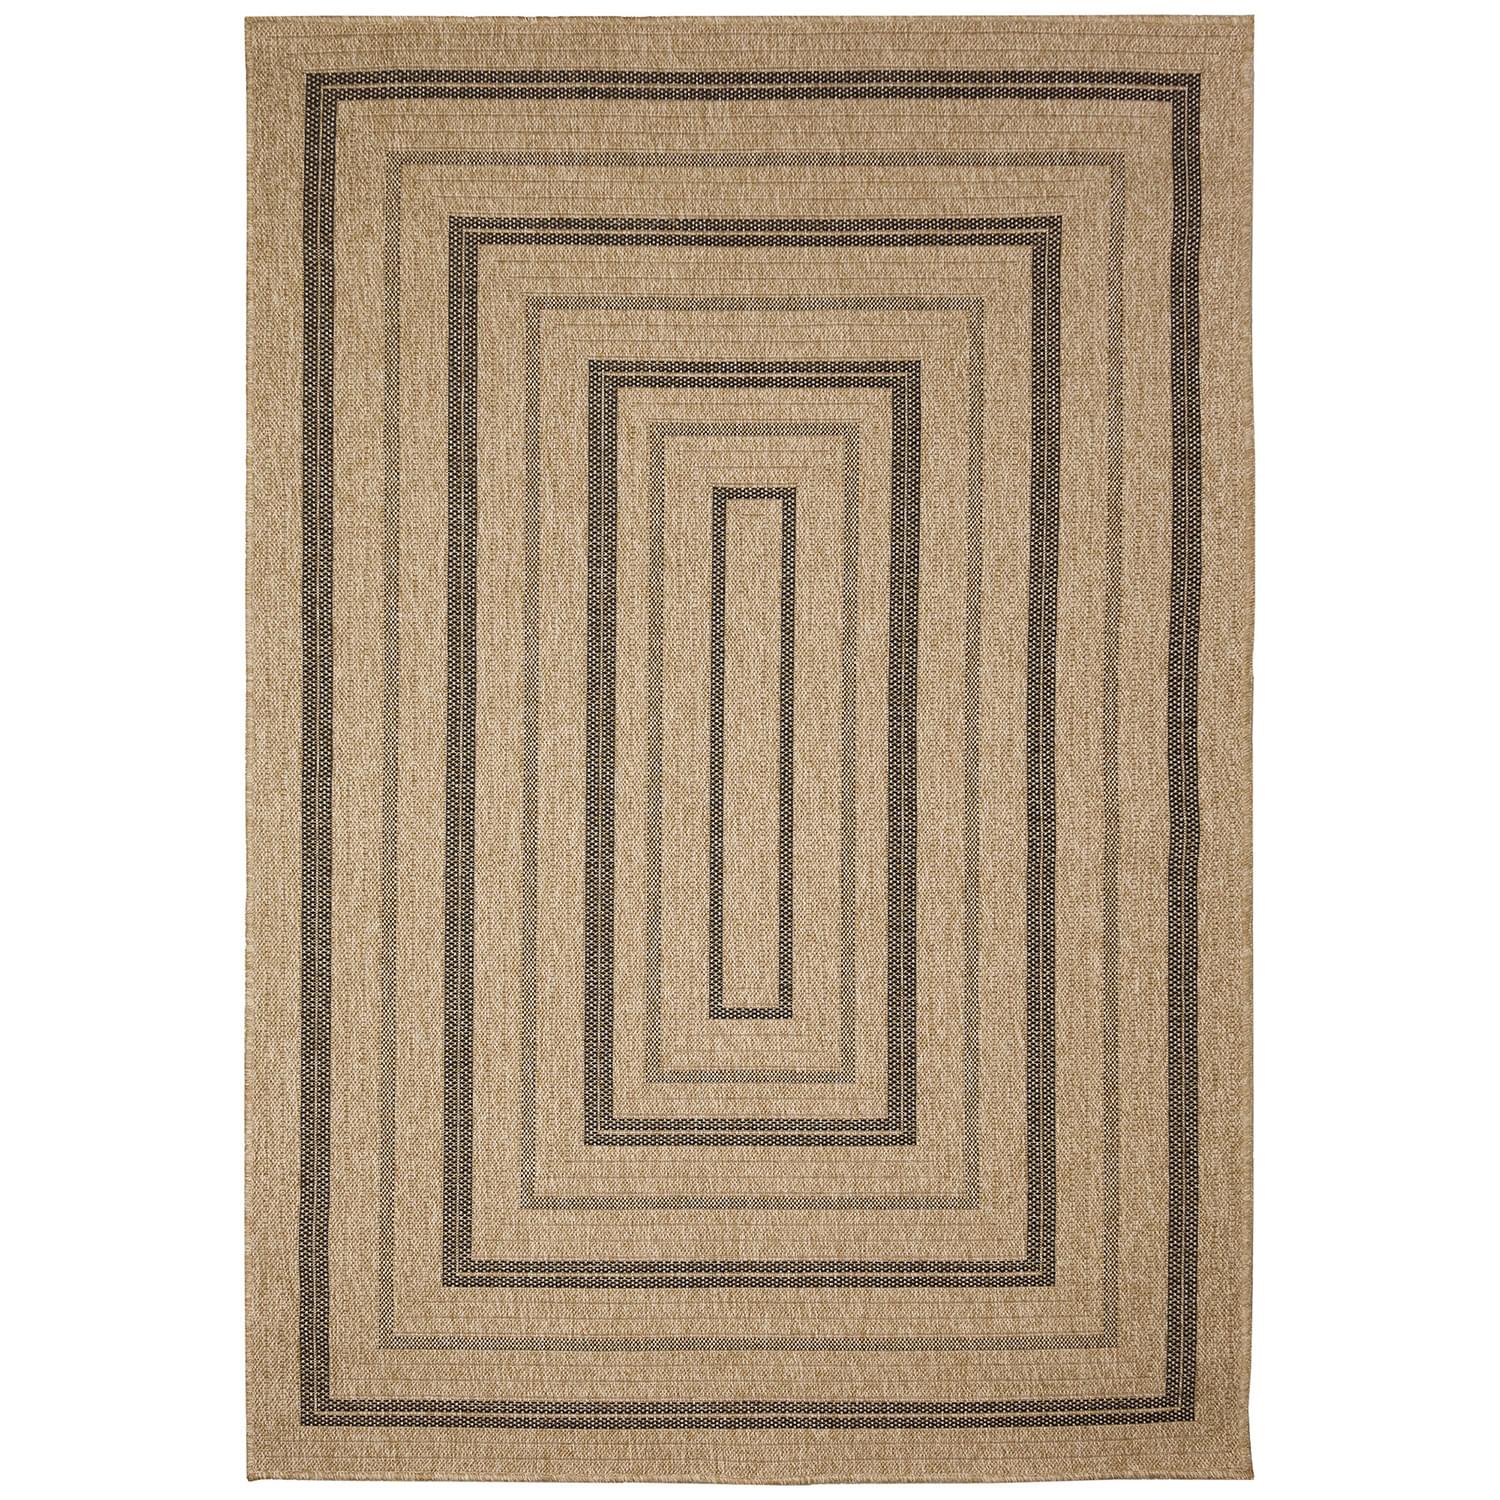 Liora Manne Sahara Low Profile  Easy Care Woven Weather Resistant Rug- Multi Border Natural  Product Image